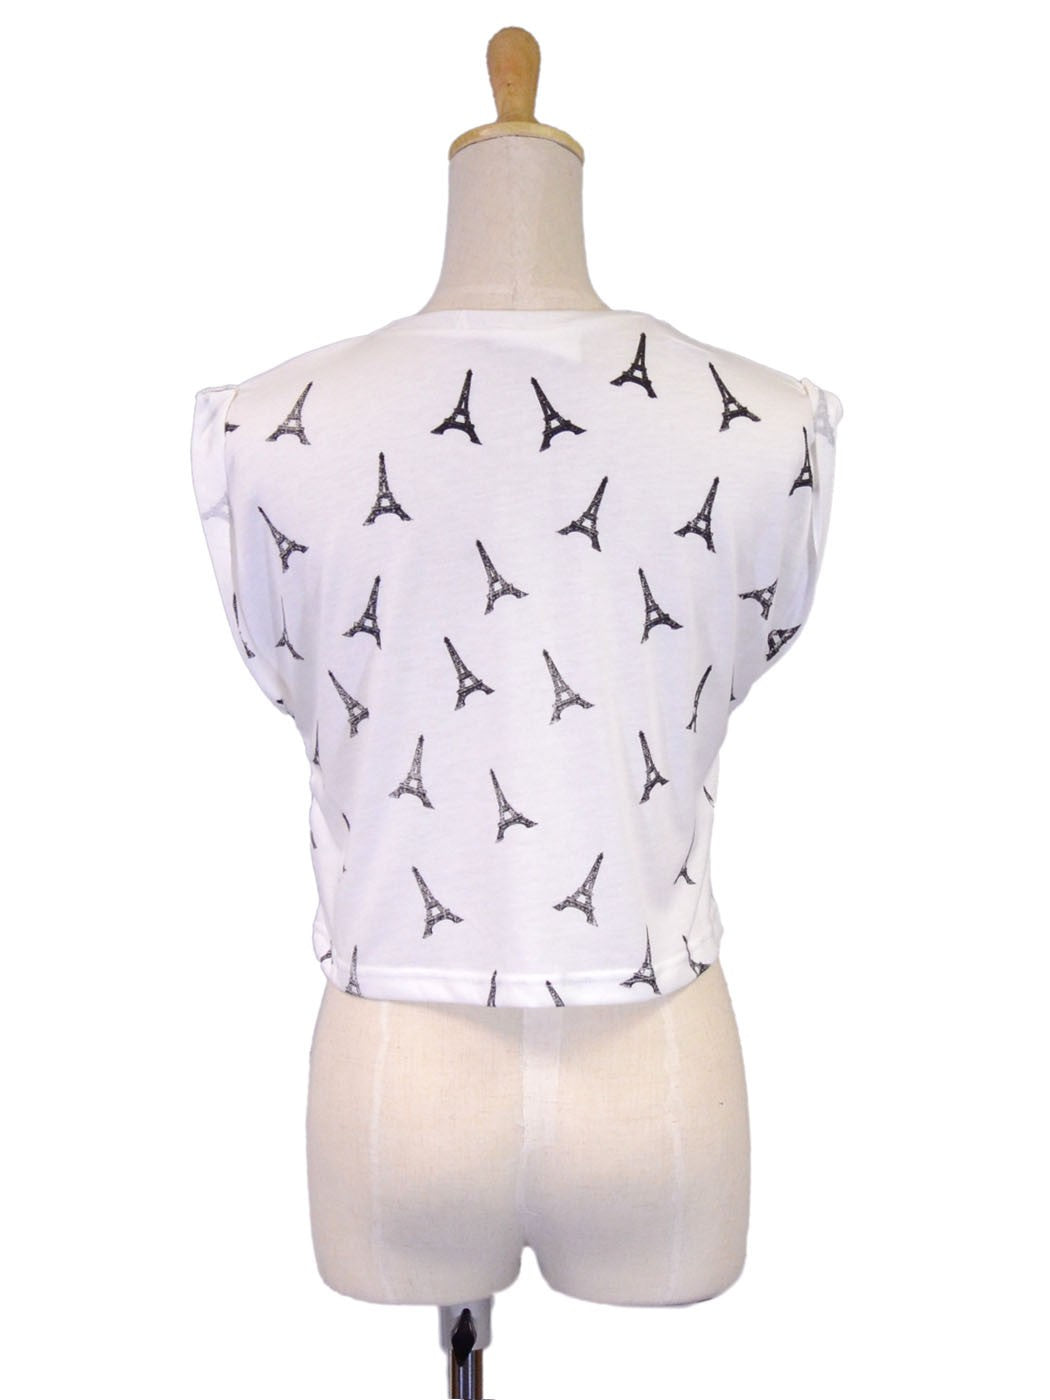 En Creme Scattered Eiffel Tower Print Cropped Sleeveless Crew Neck Top - ALILANG.COM